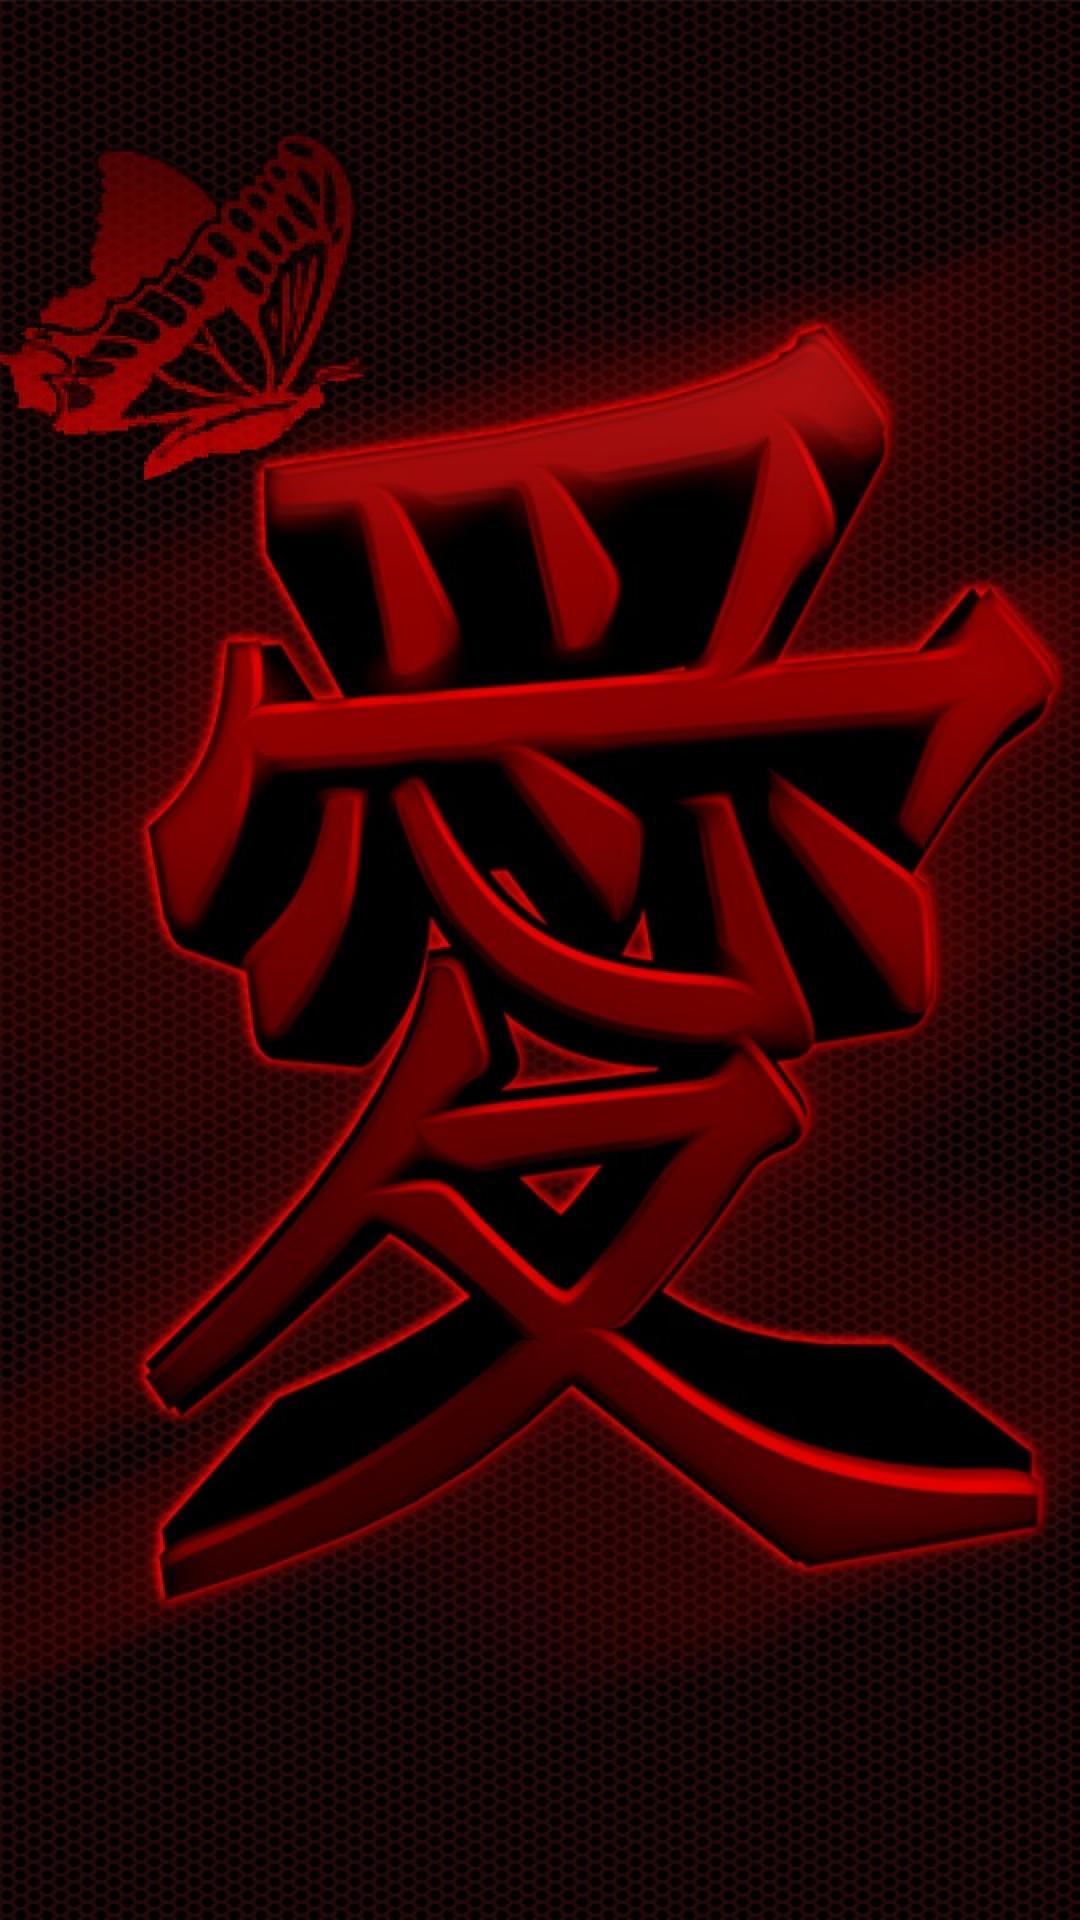 Chinese Character iPhone Wallpaper Free Chinese Character